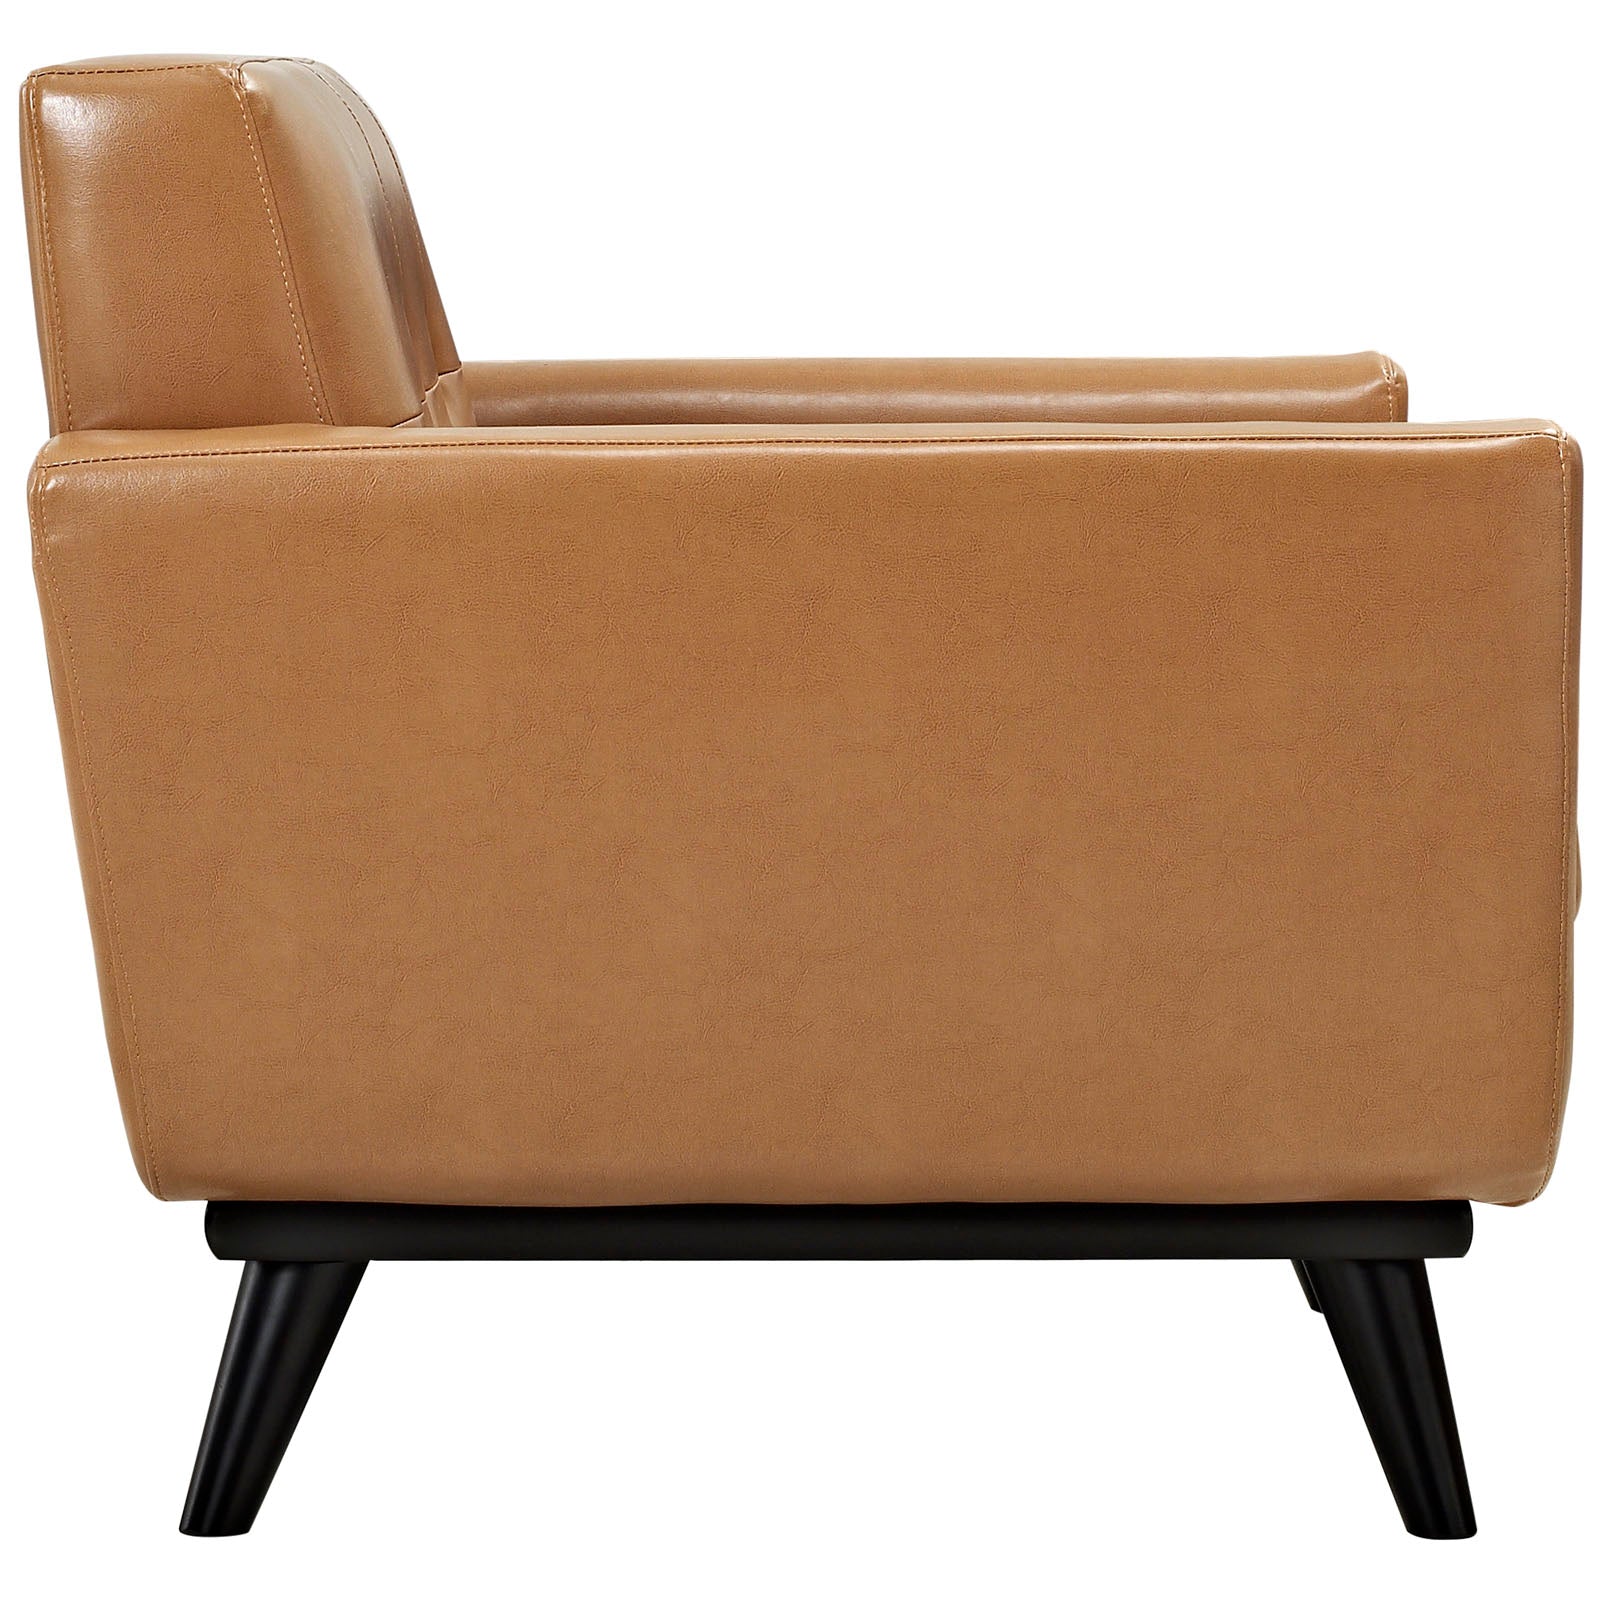 Modway Accent Chairs - Engage Bonded Leather Armchair Tan